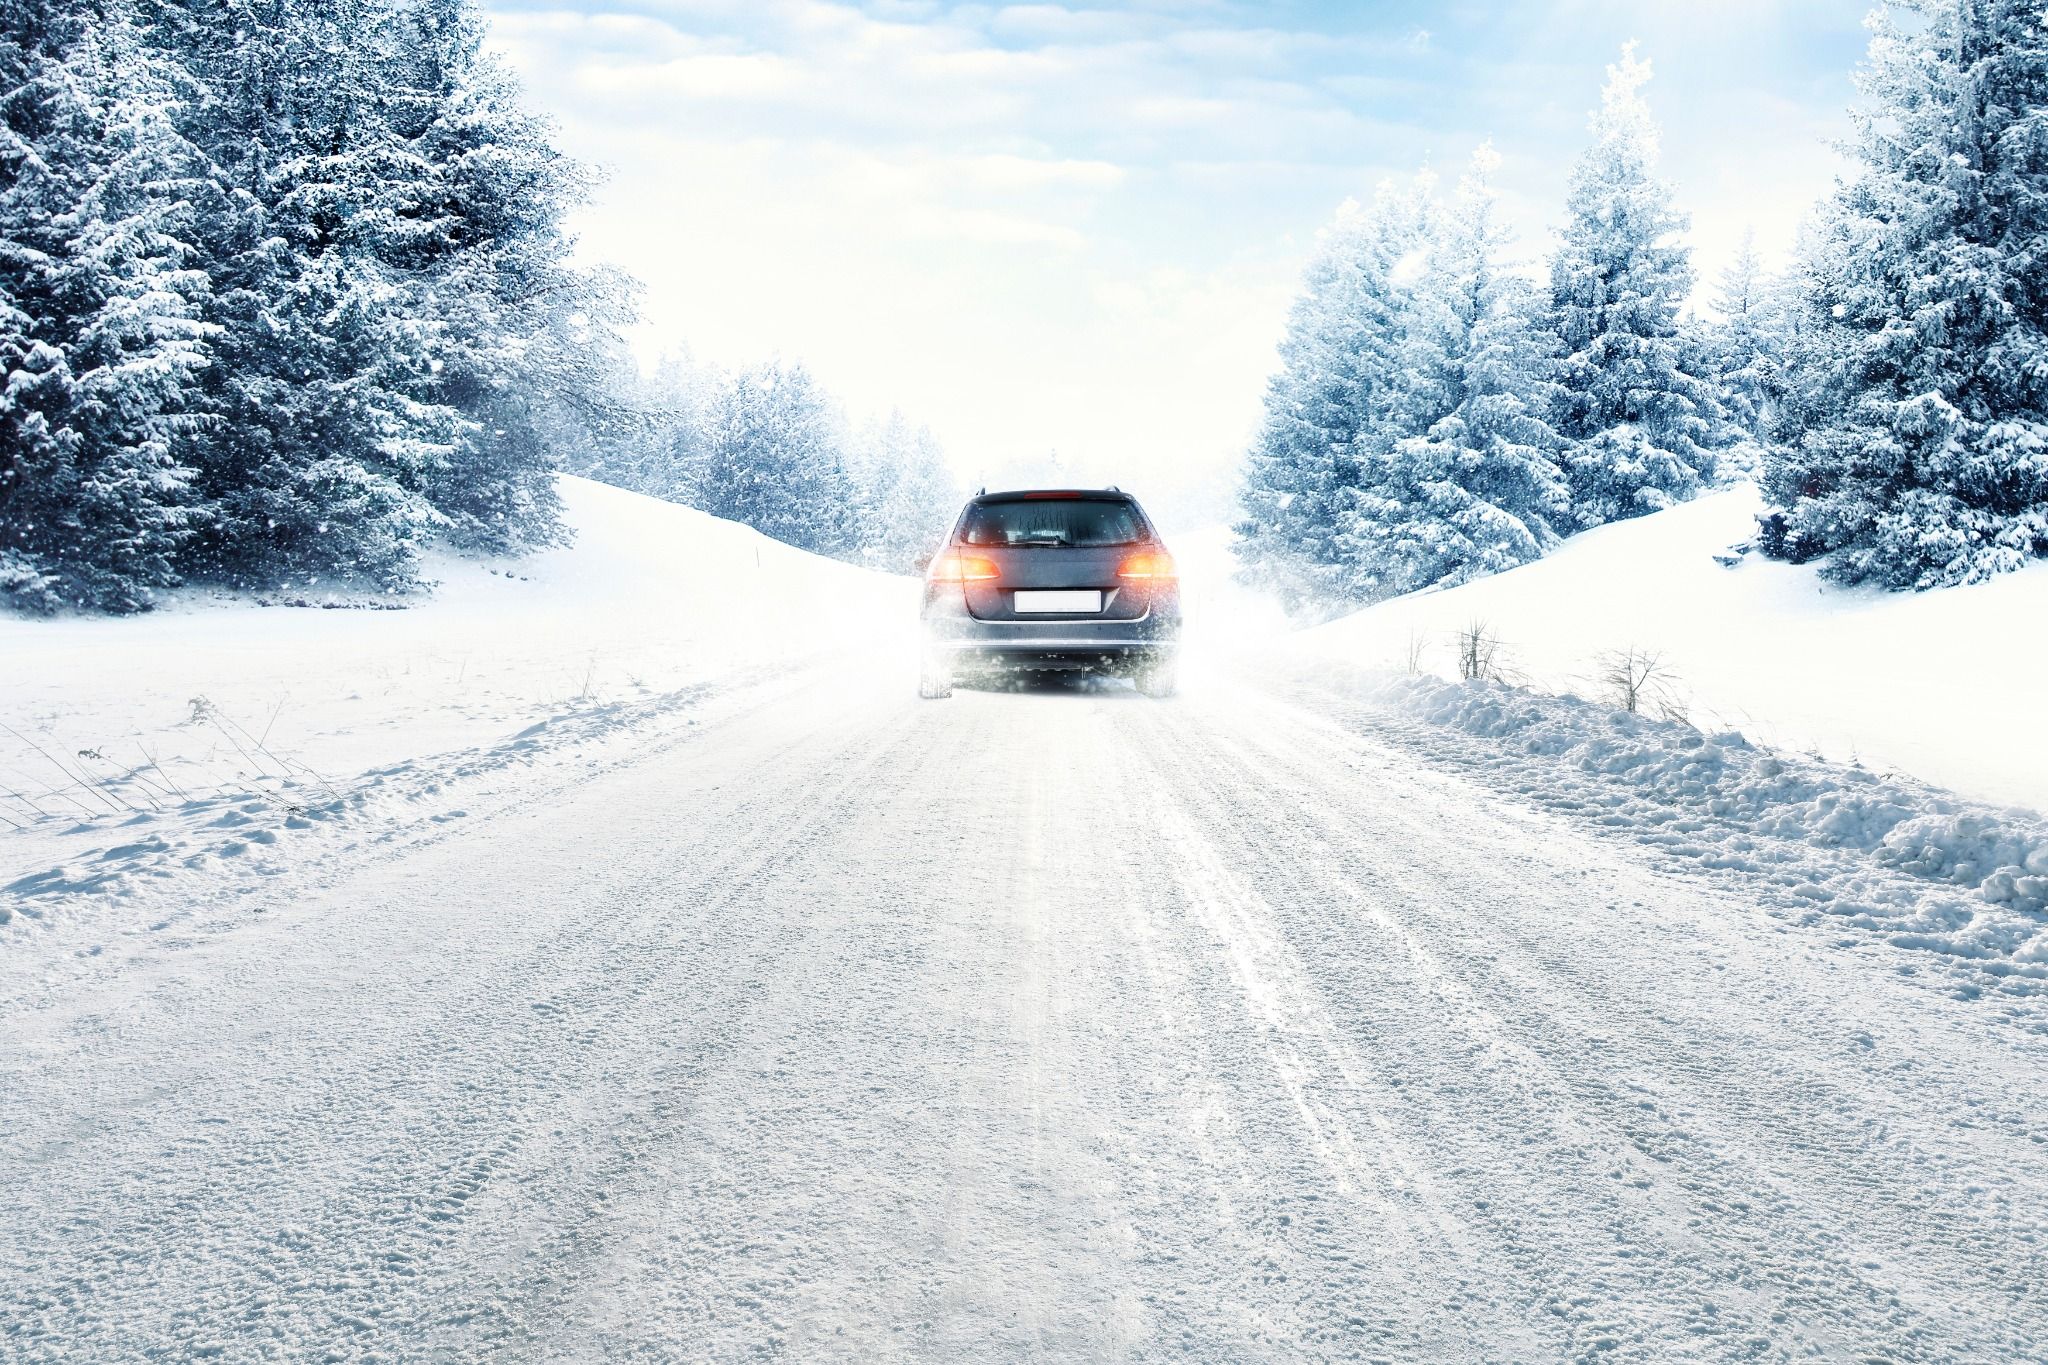 What should I do when driving in cold weather? image